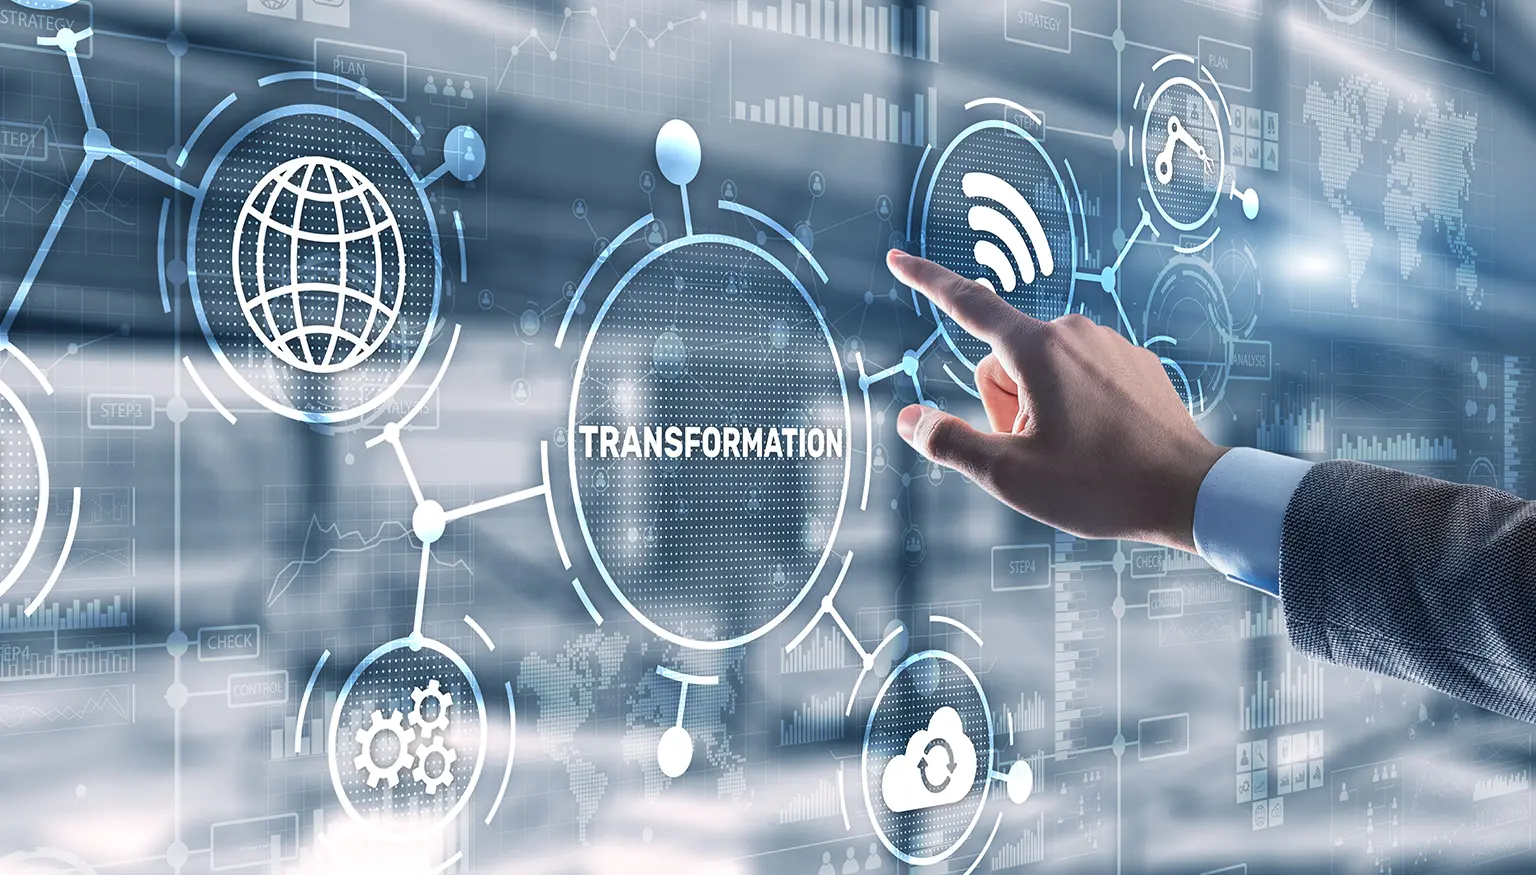 Digital Transformation: The Need for Businesses to Digitally Transform